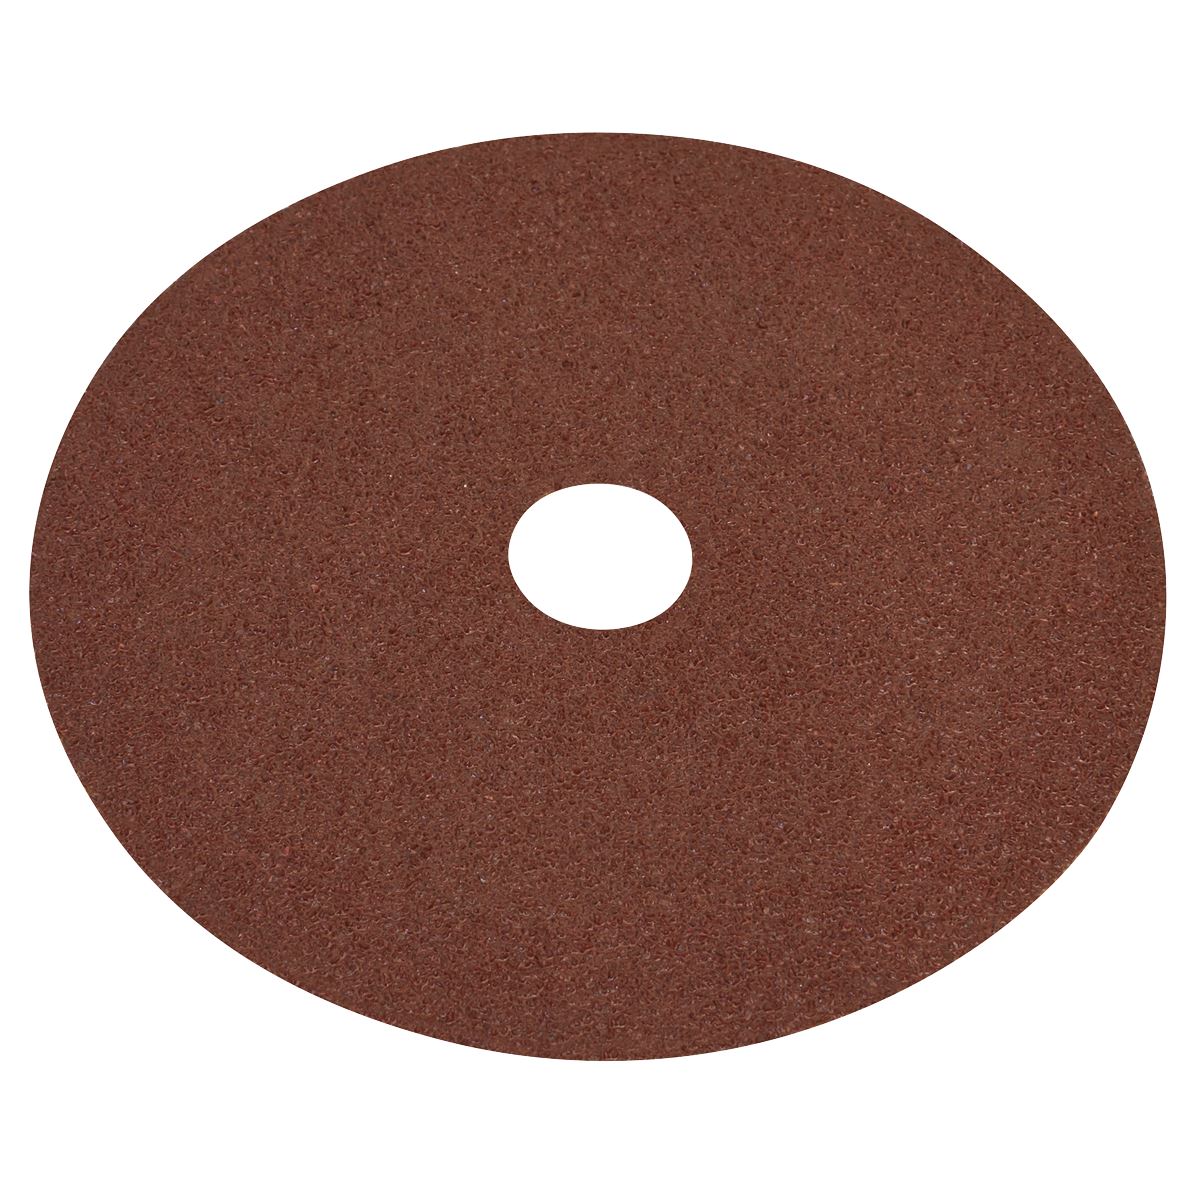 Worksafe by Sealey Fibre Backed Disc Ø115mm - 40Grit Pack of 25